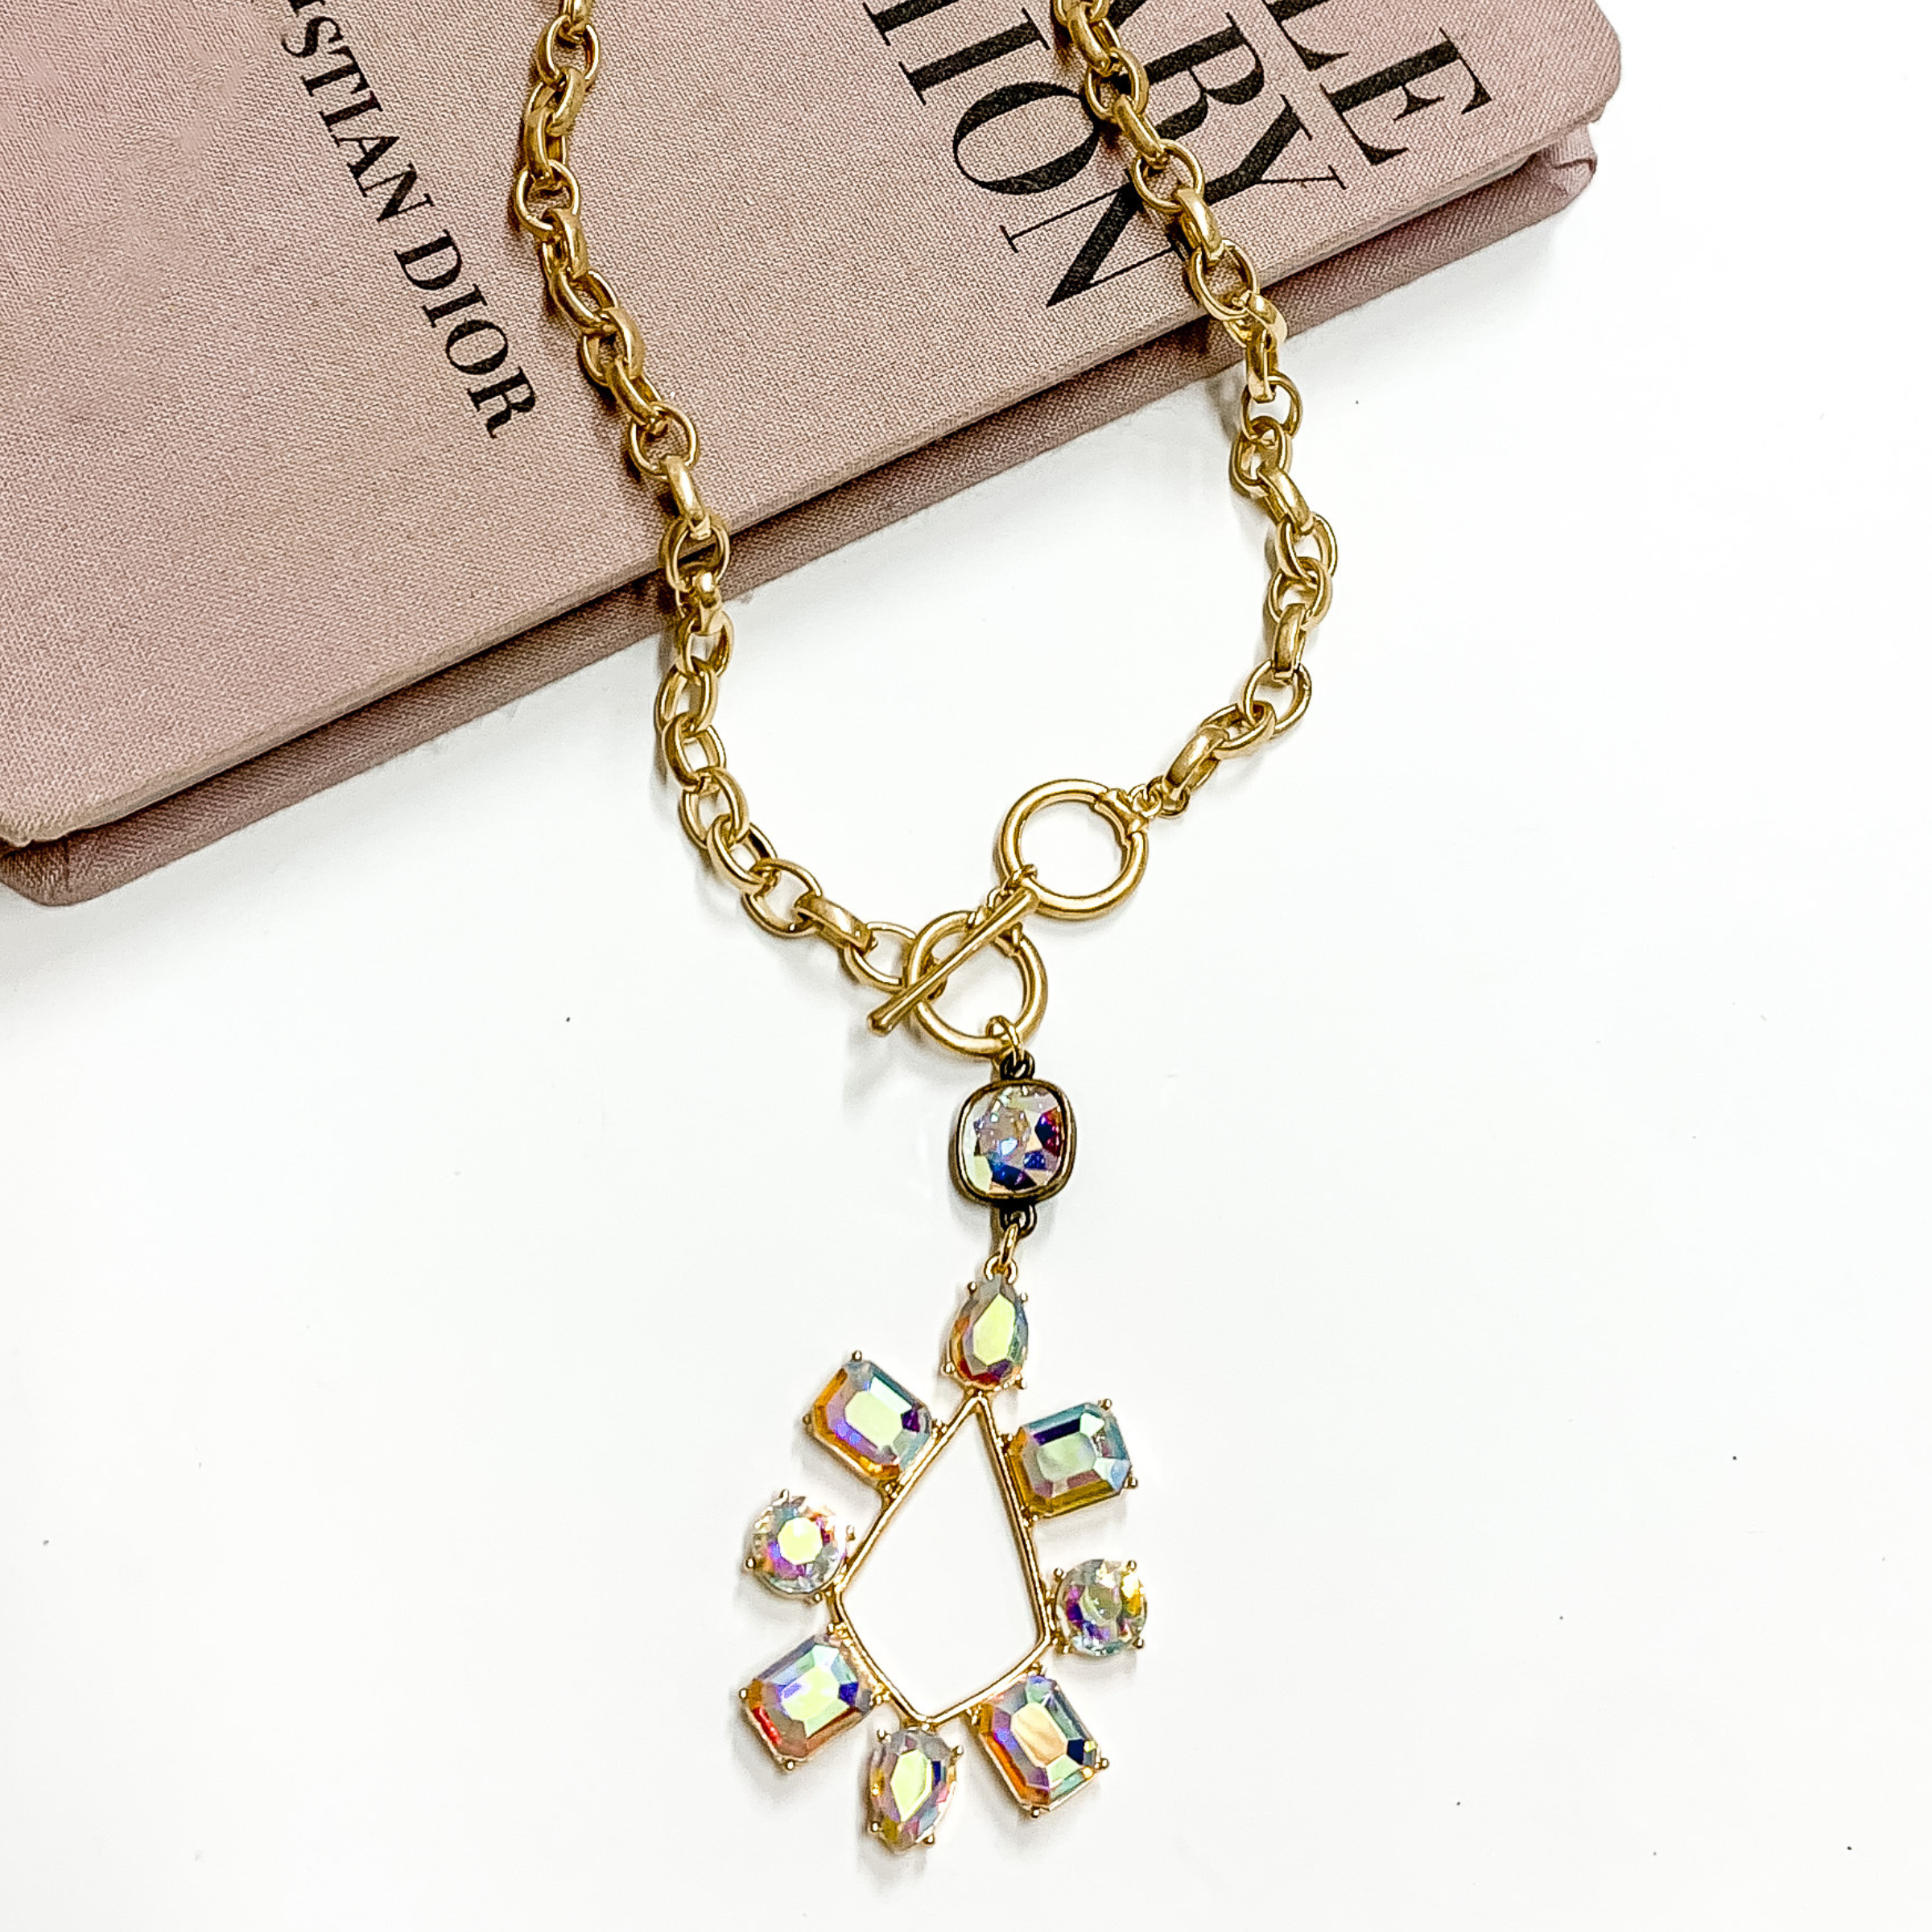 Gold chain necklace with toggle, front clasp and a multi shape ab crystal teardrop pendant. This necklace is pictured laying partially on a mauve colored book on white background. 